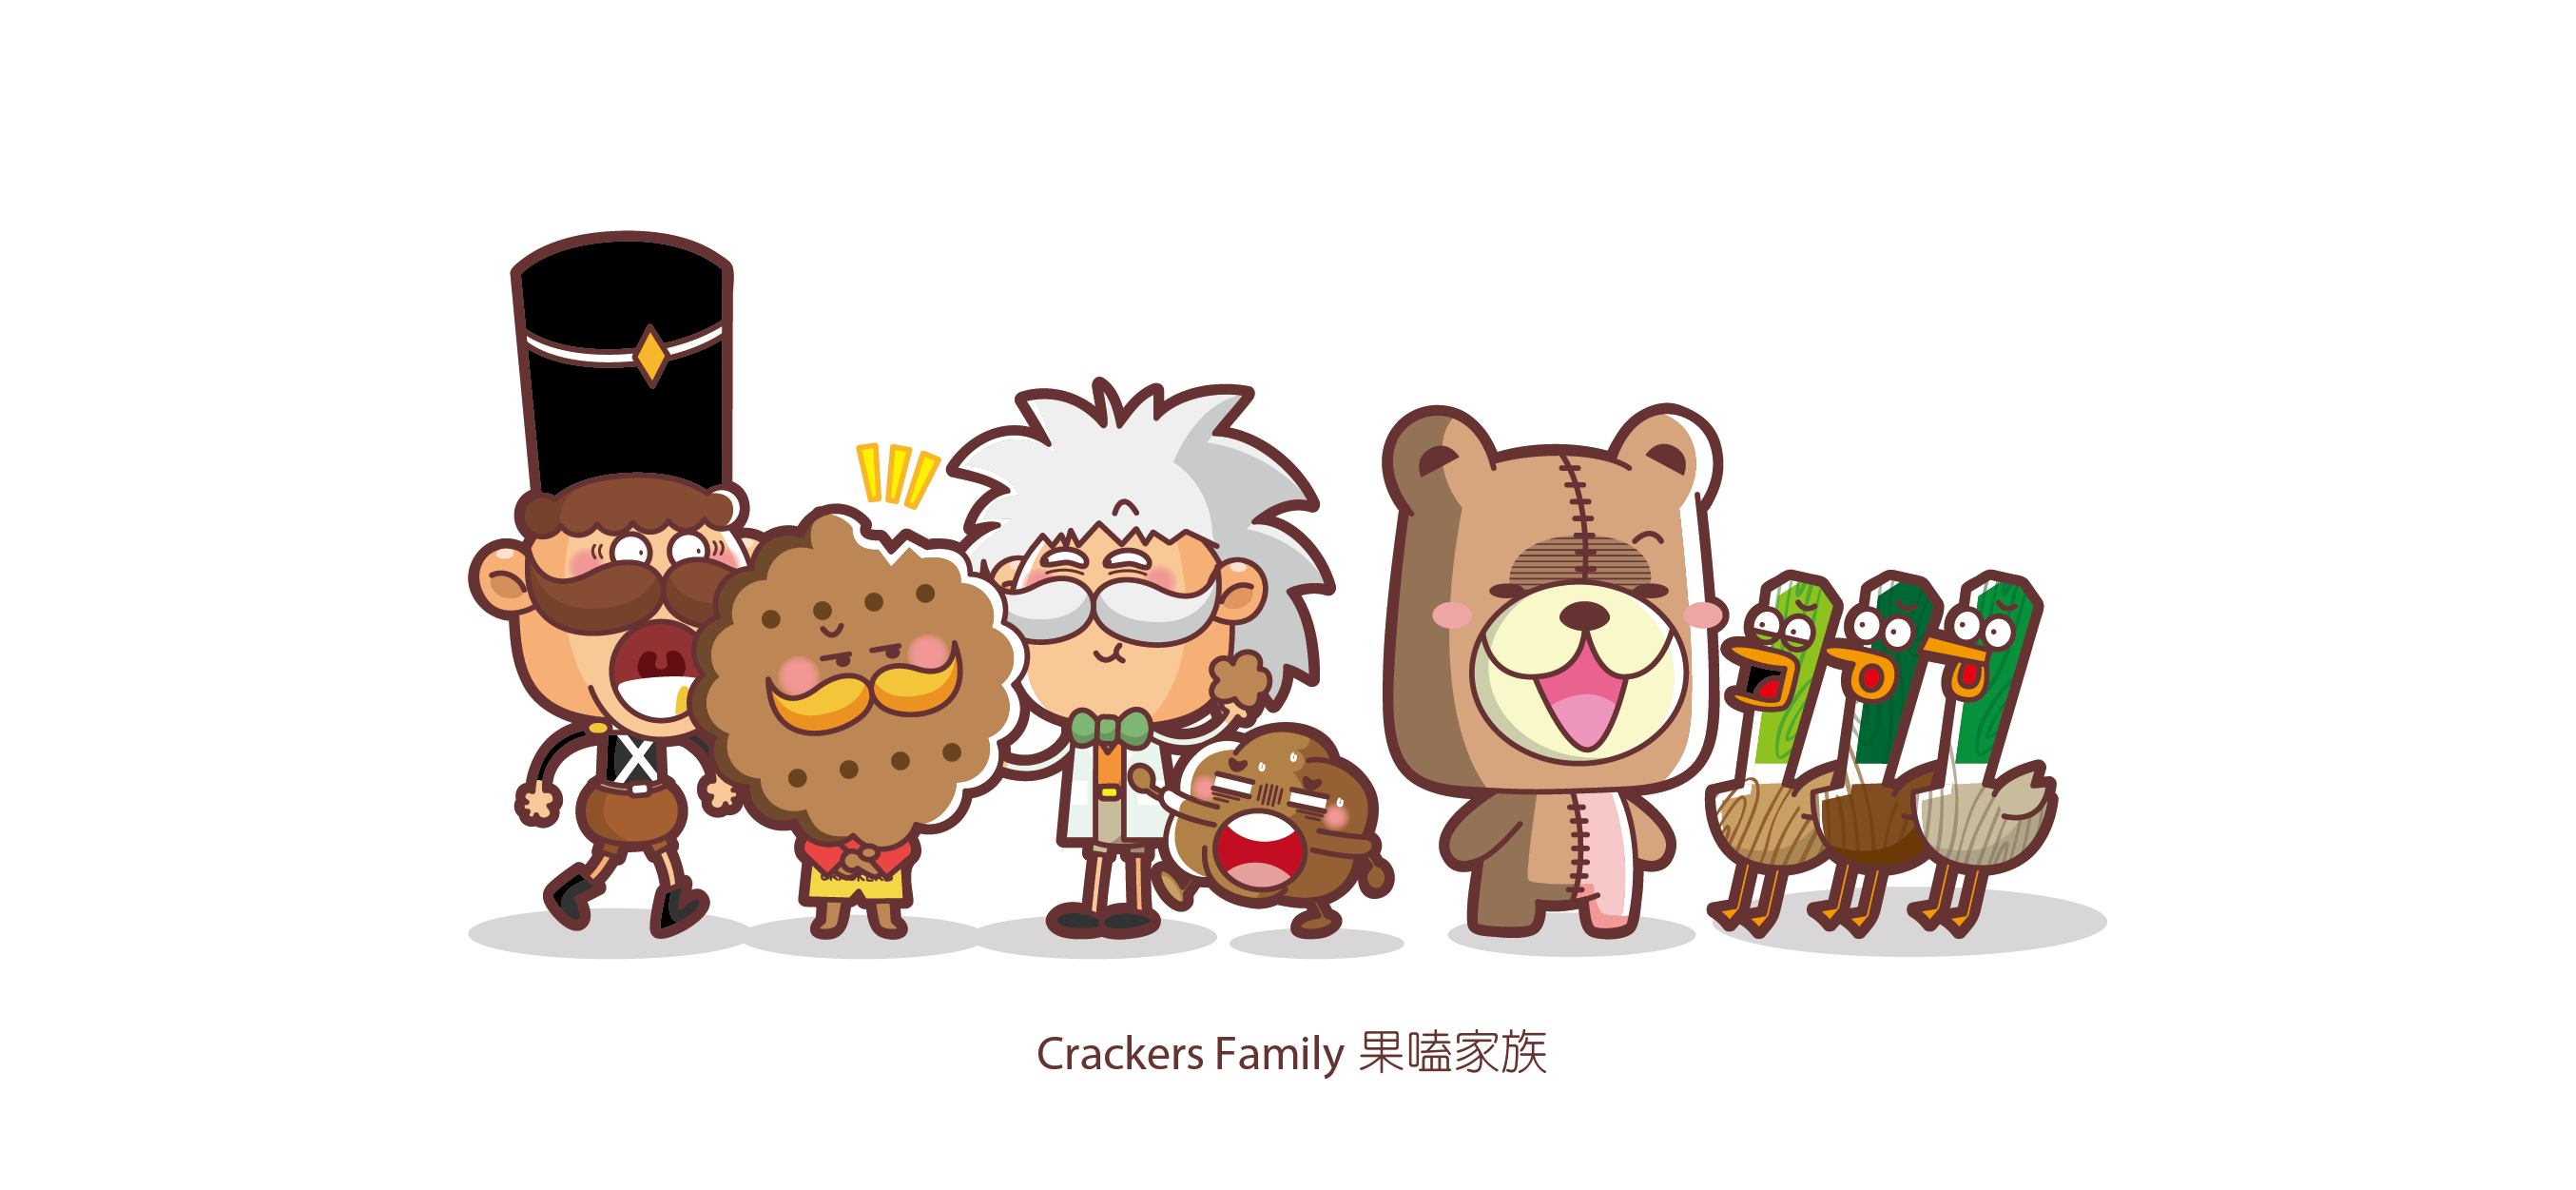 Crackers Character1